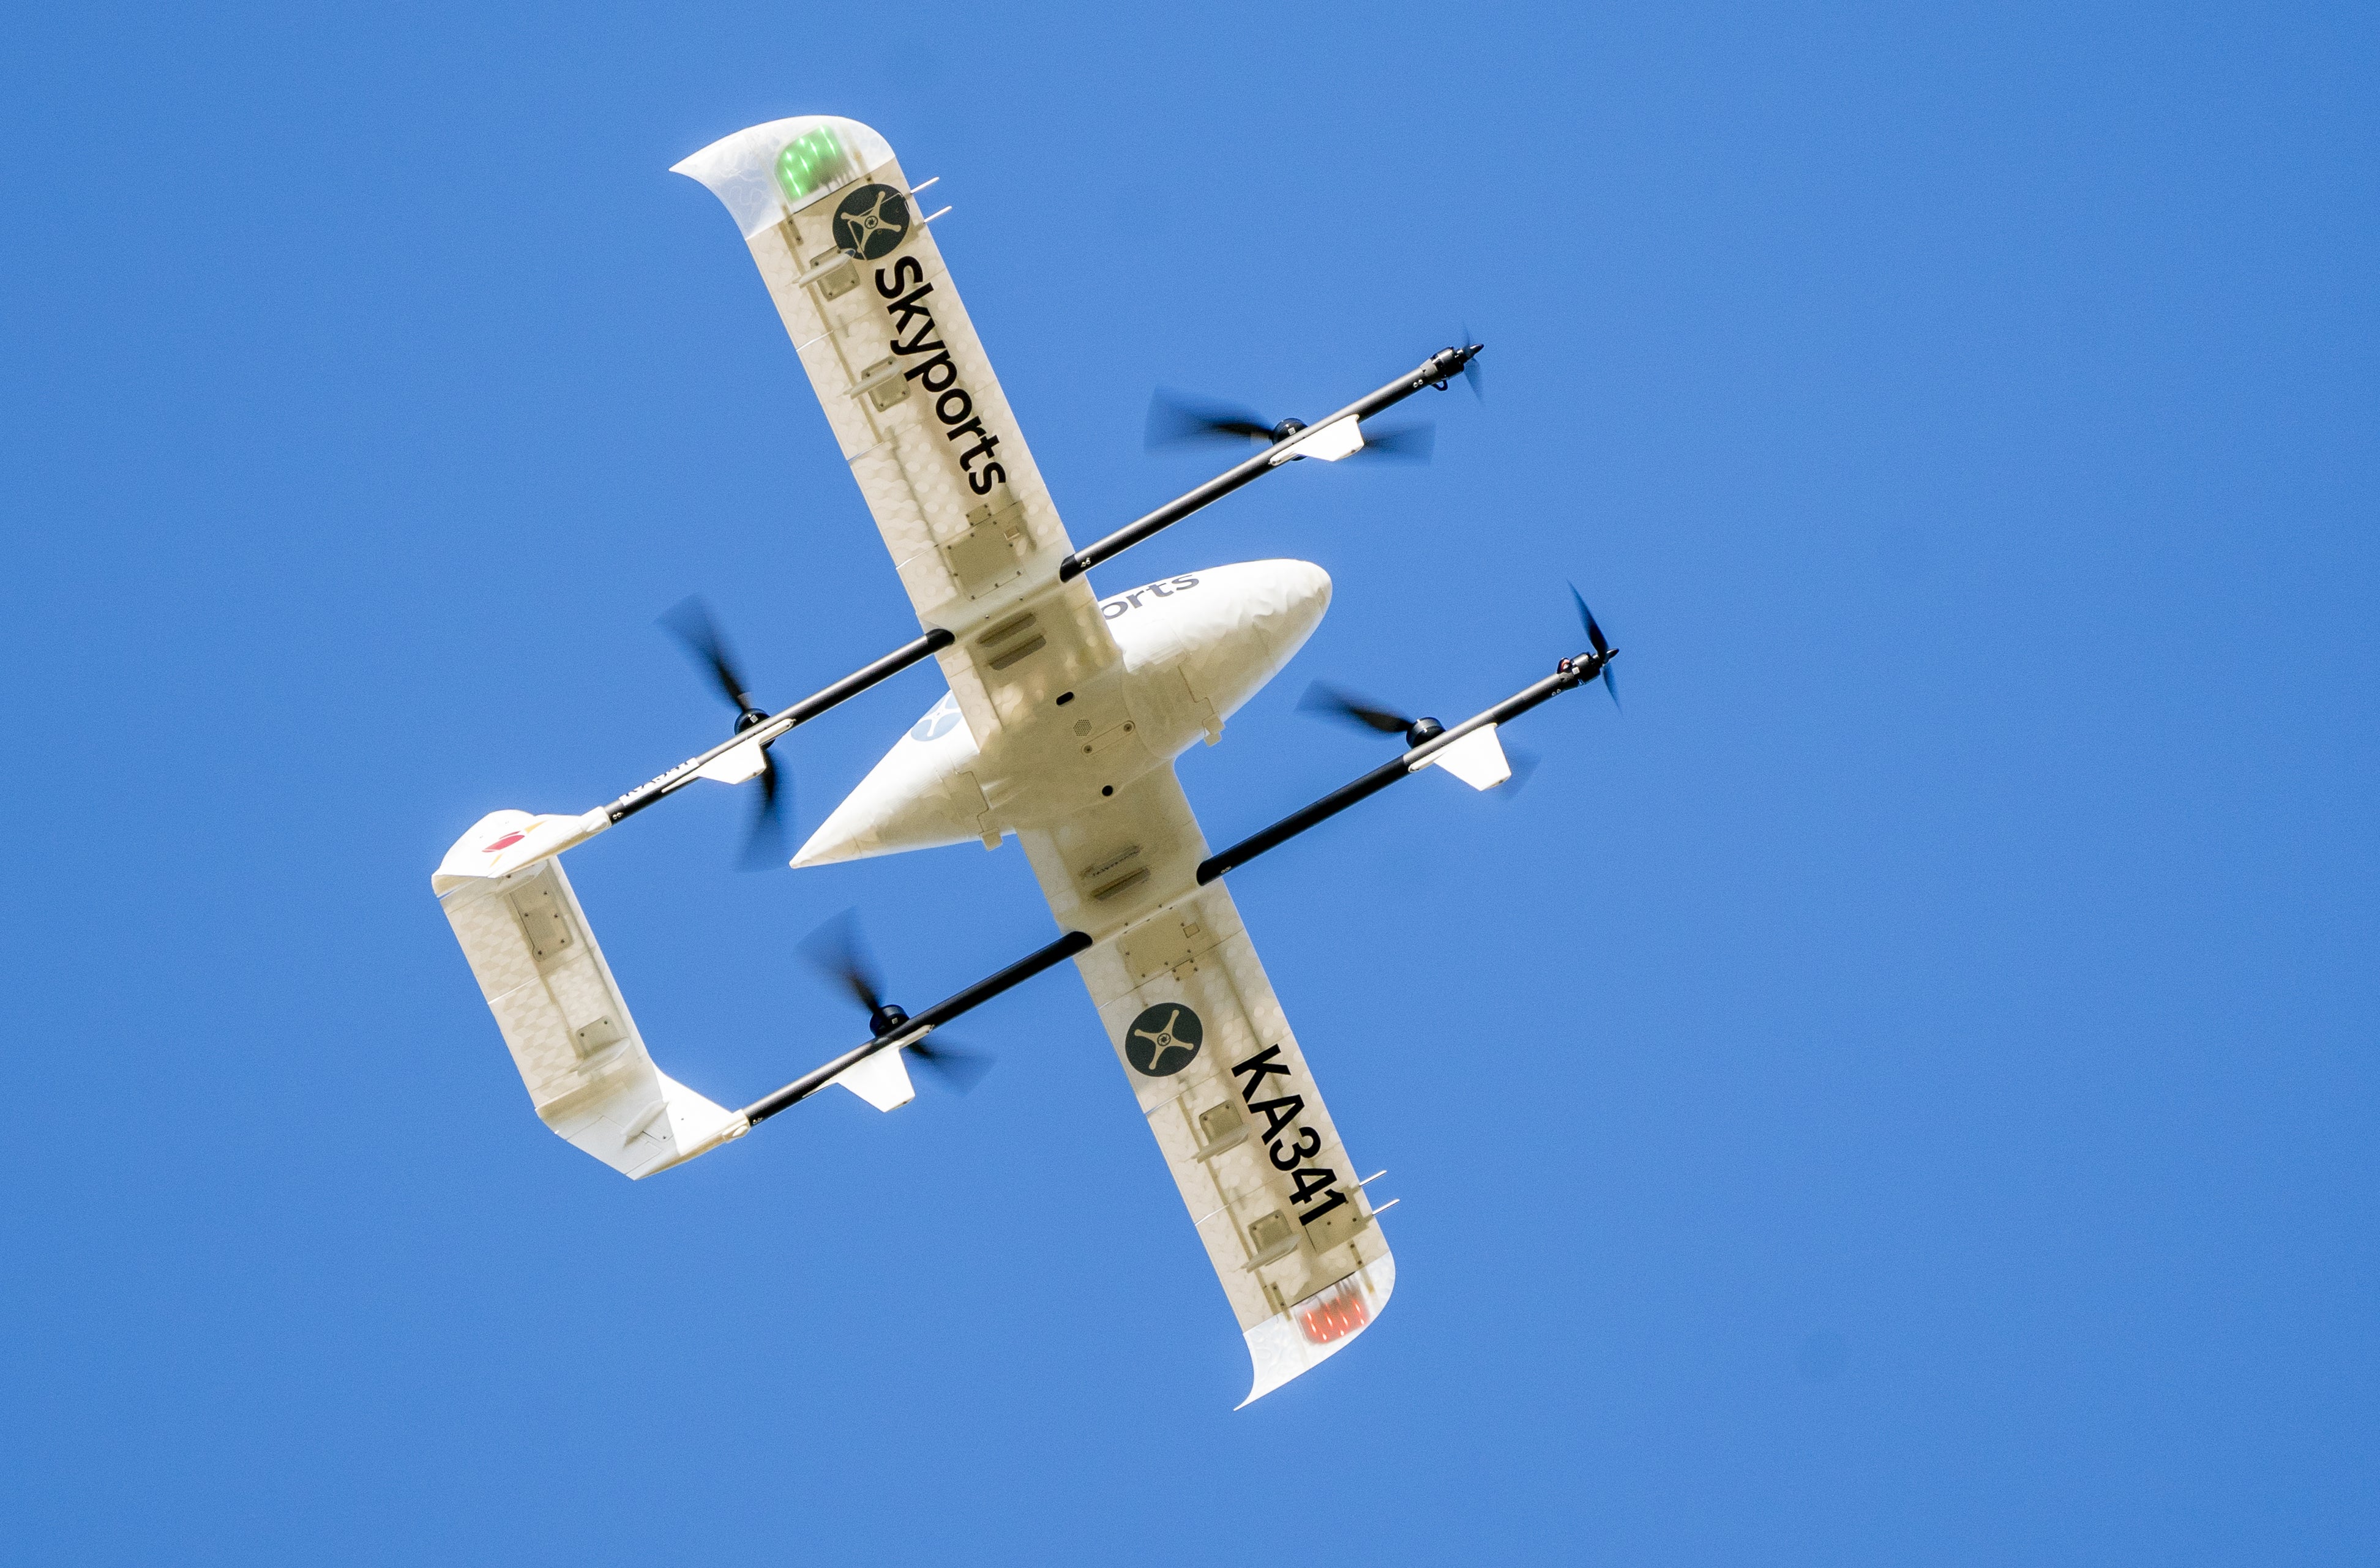 A trial scheme could see drones used to deliver school lunches to youngsters in some of Scotland’s more remote communities. (Jane Barlow/PA)